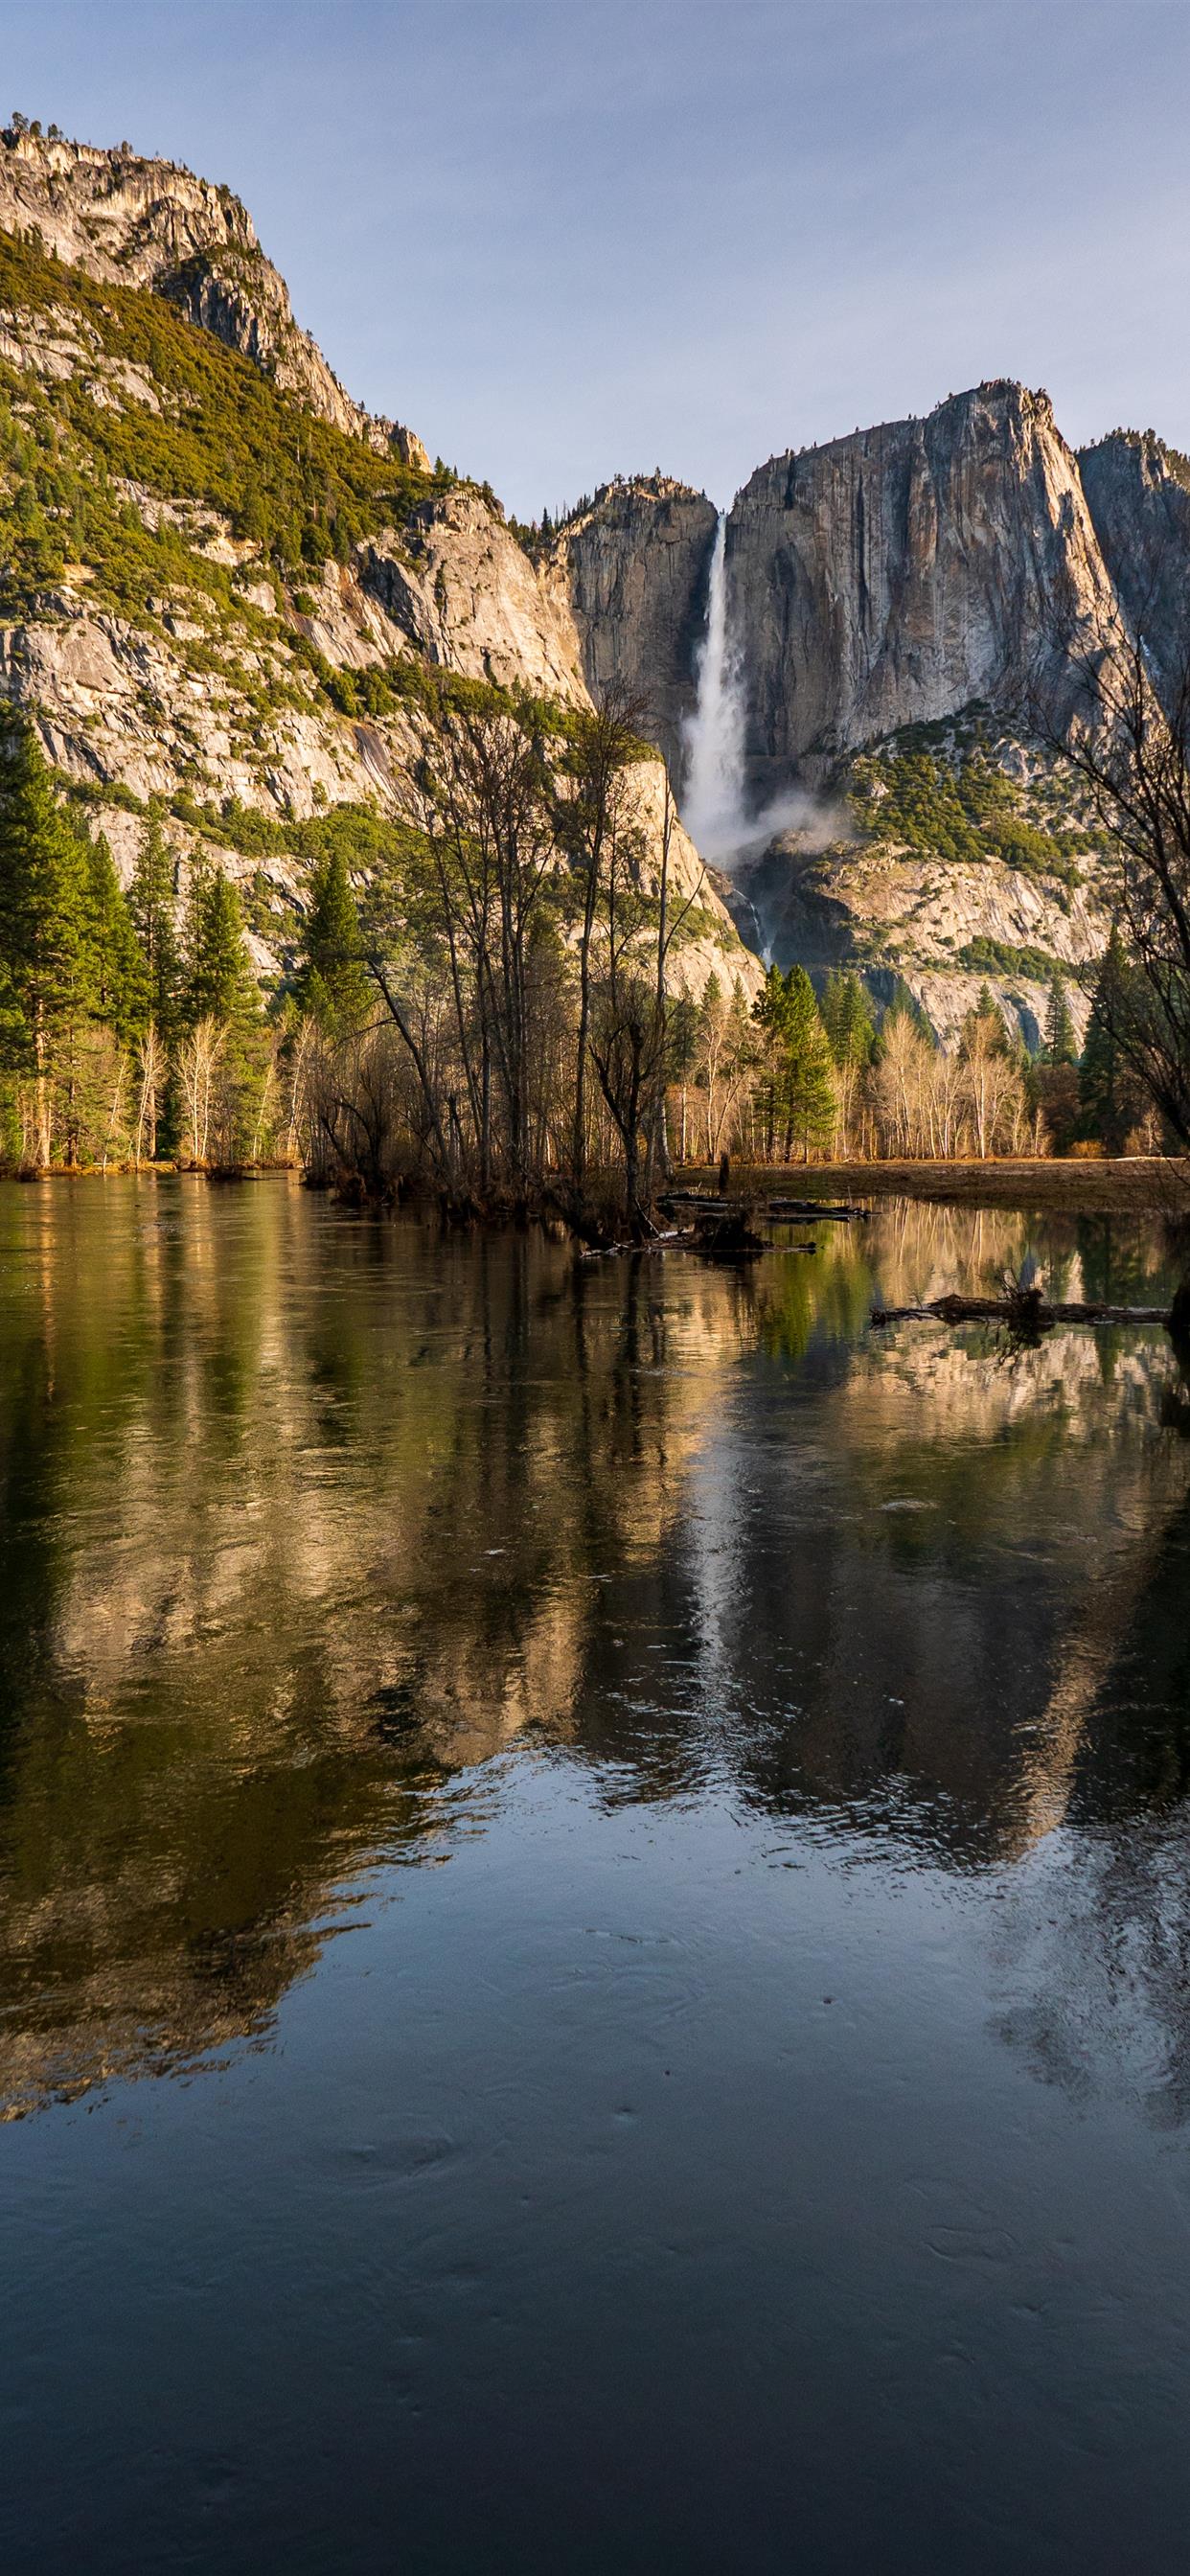 The reflection of Yosemite Falls appears in spring. iPhone X